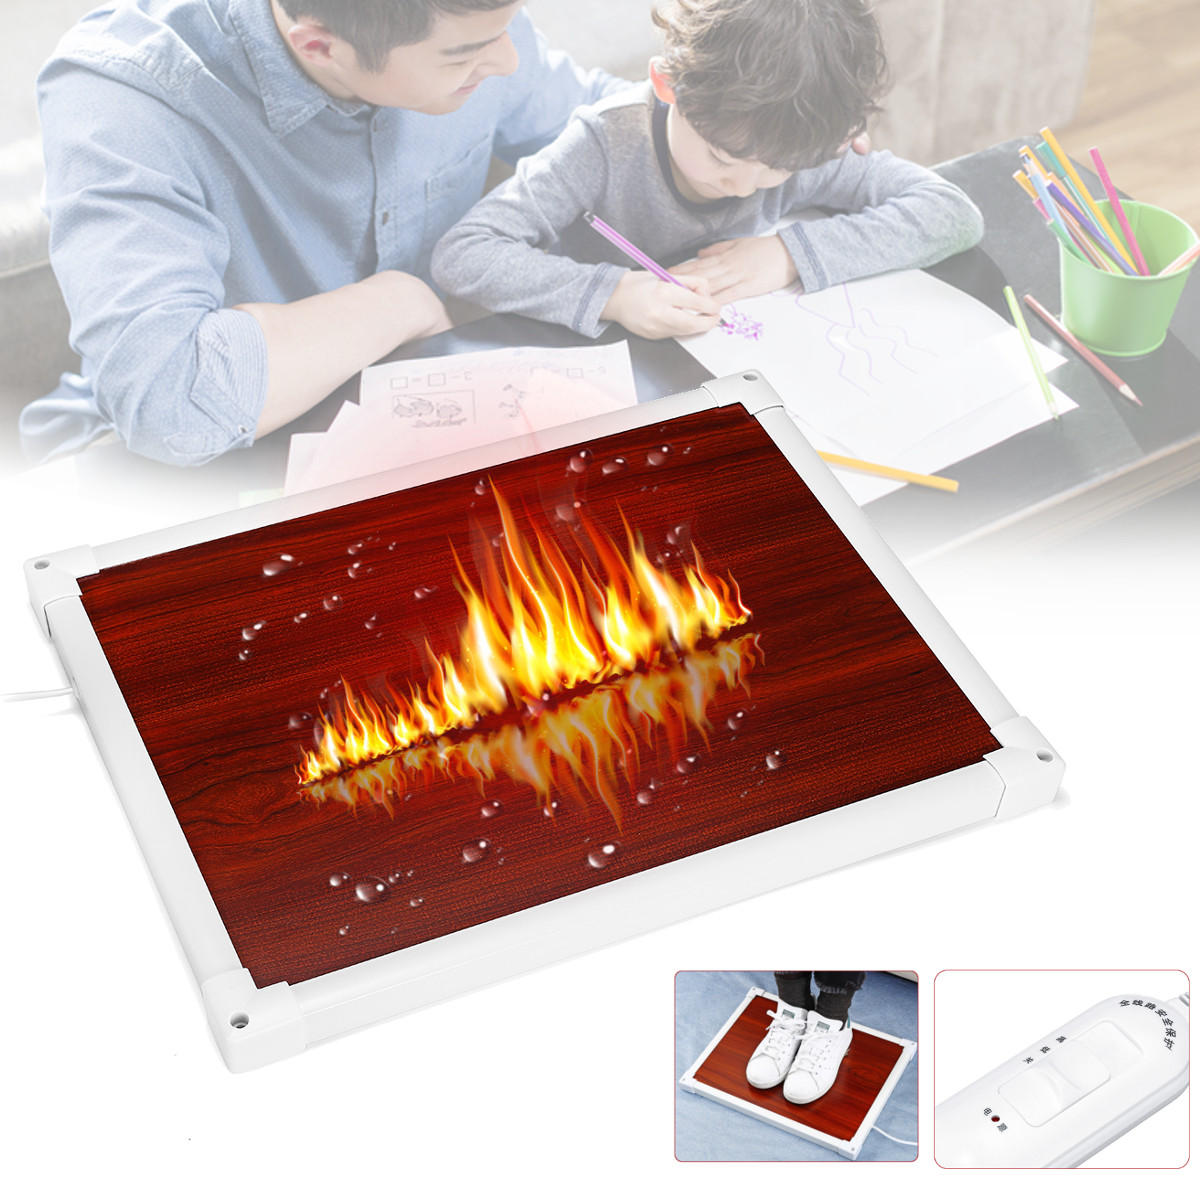 Mobile Fireplace Inspirational 220v 100w Electric Foot Heat Mat Heating Carbon Crystal Foot Warmer Heater